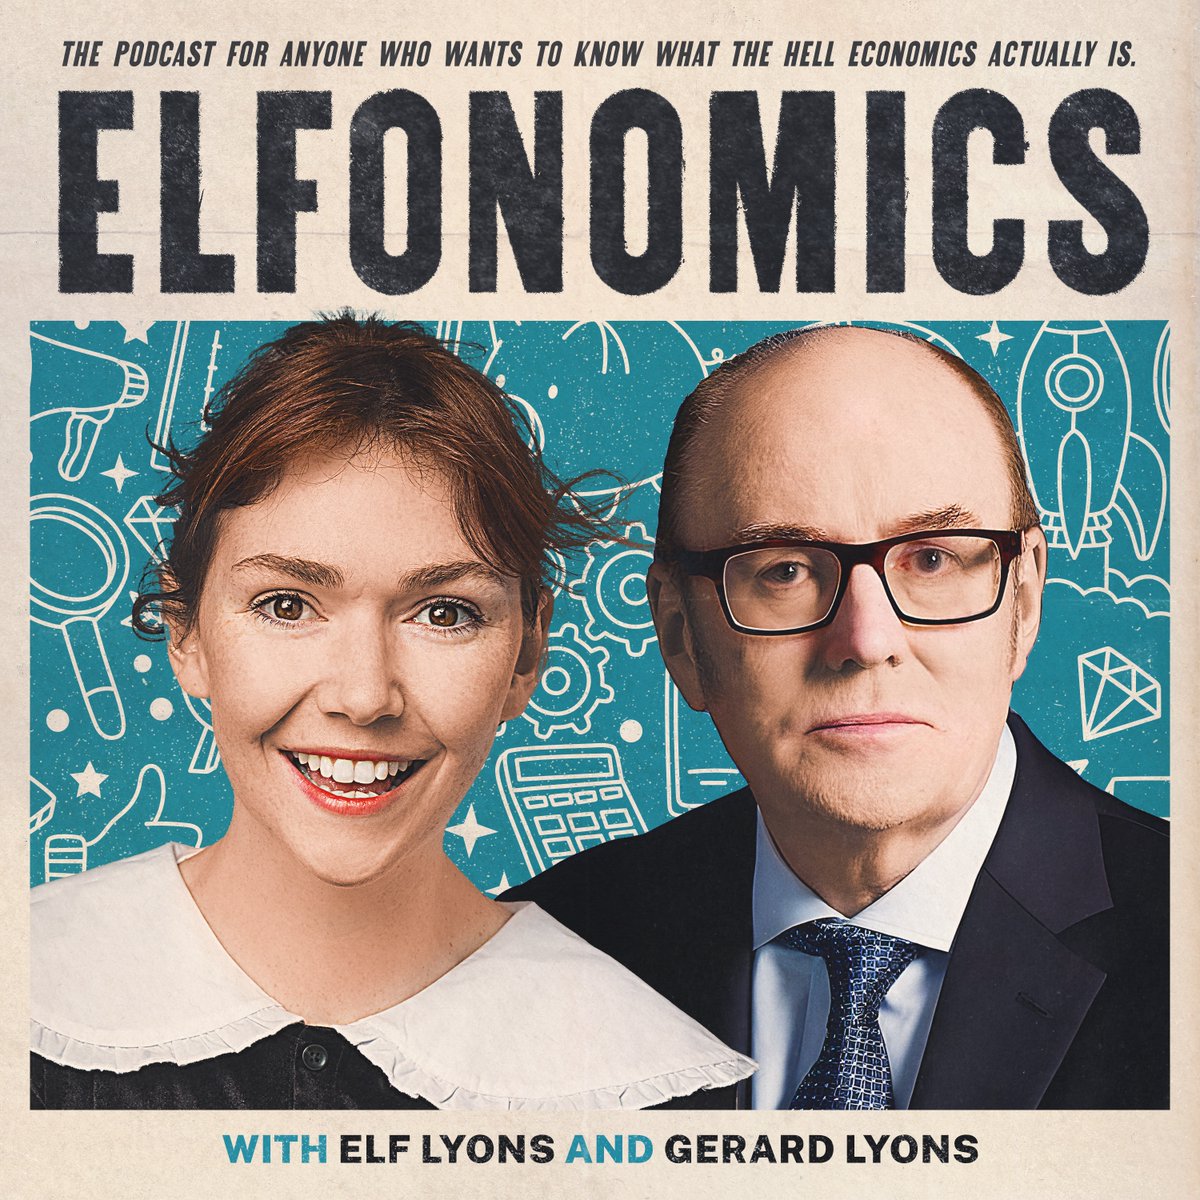 🔥KLAXON🔥 Season 2 of #Elfonomics is dropping at the end of this month! @elf_lyons & @DrGerardLyons discuss the BIG topics - from #OnlyFans, why #weddings are so expensive & which punk songs describe the global #economy. Subscribe now: rb.gy/chqi5y